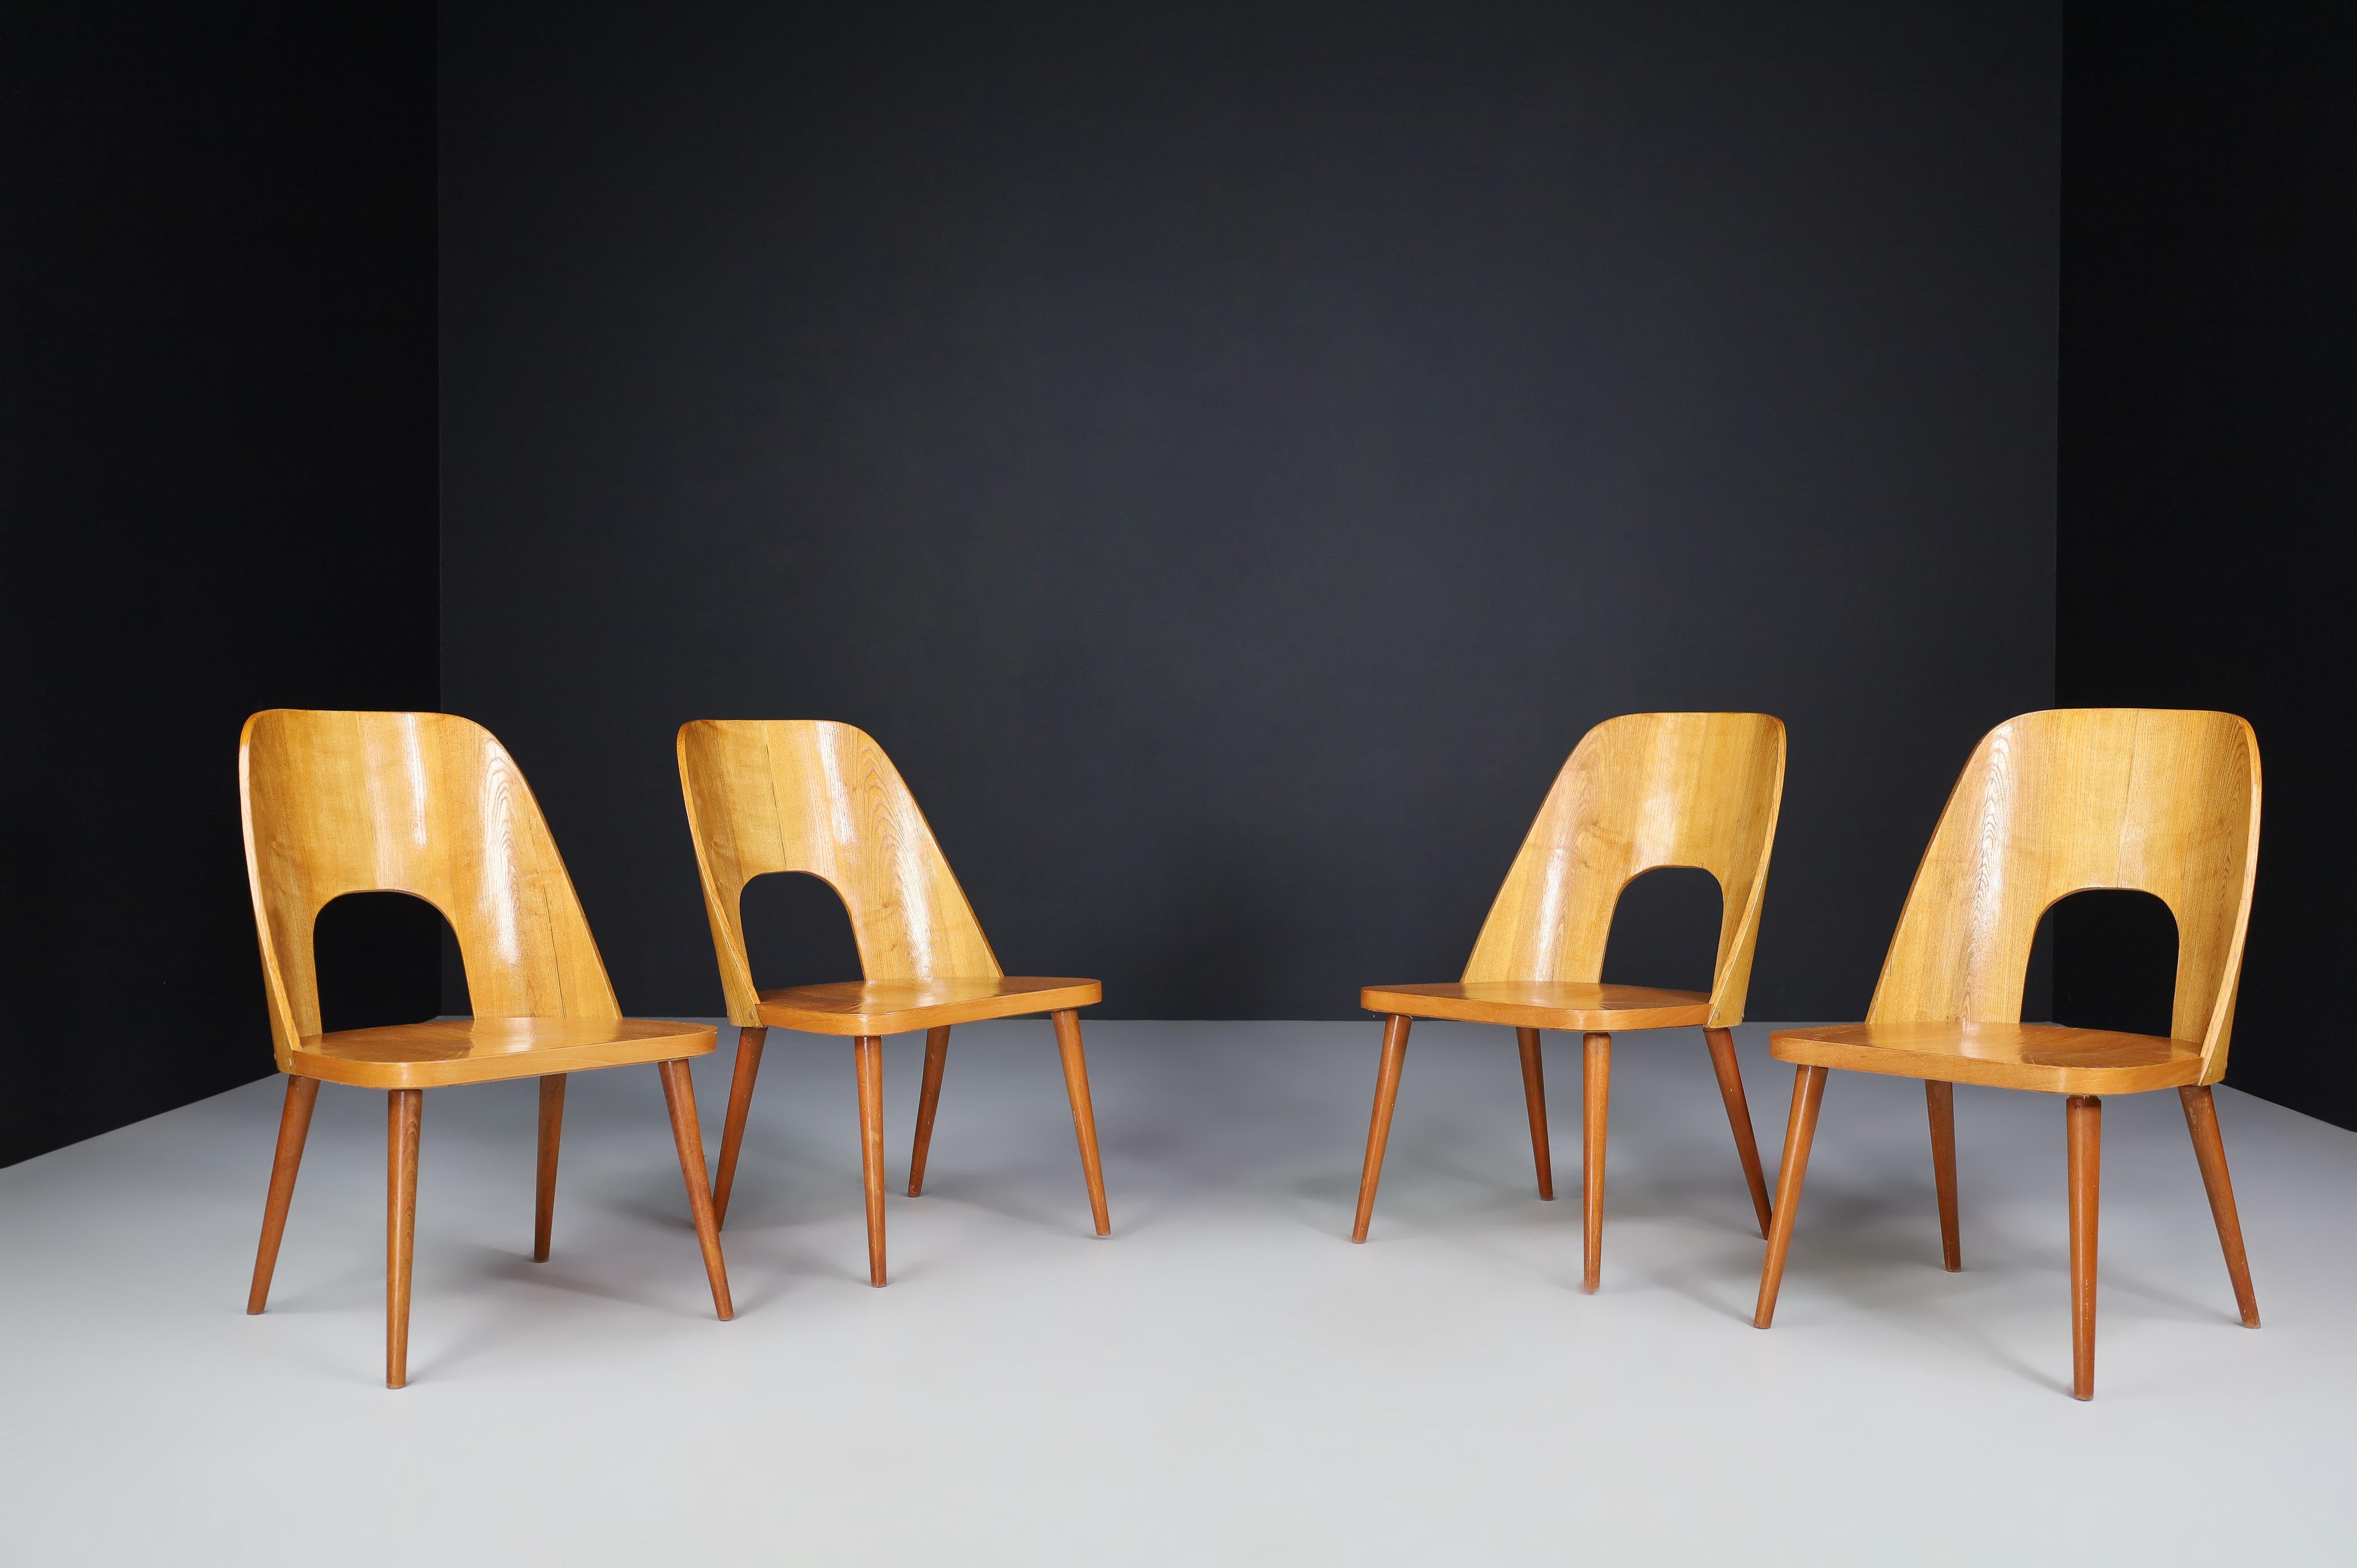 Oswald Haerdtl set of four easy chairs, the 1950s

A rare set of four easy chairs was designed by the Austrian designer Oswald Haerdtl and produced by Ton (Thonet) in the former Czechoslovakia 1950s. Characteristic ash wood chairs, curved